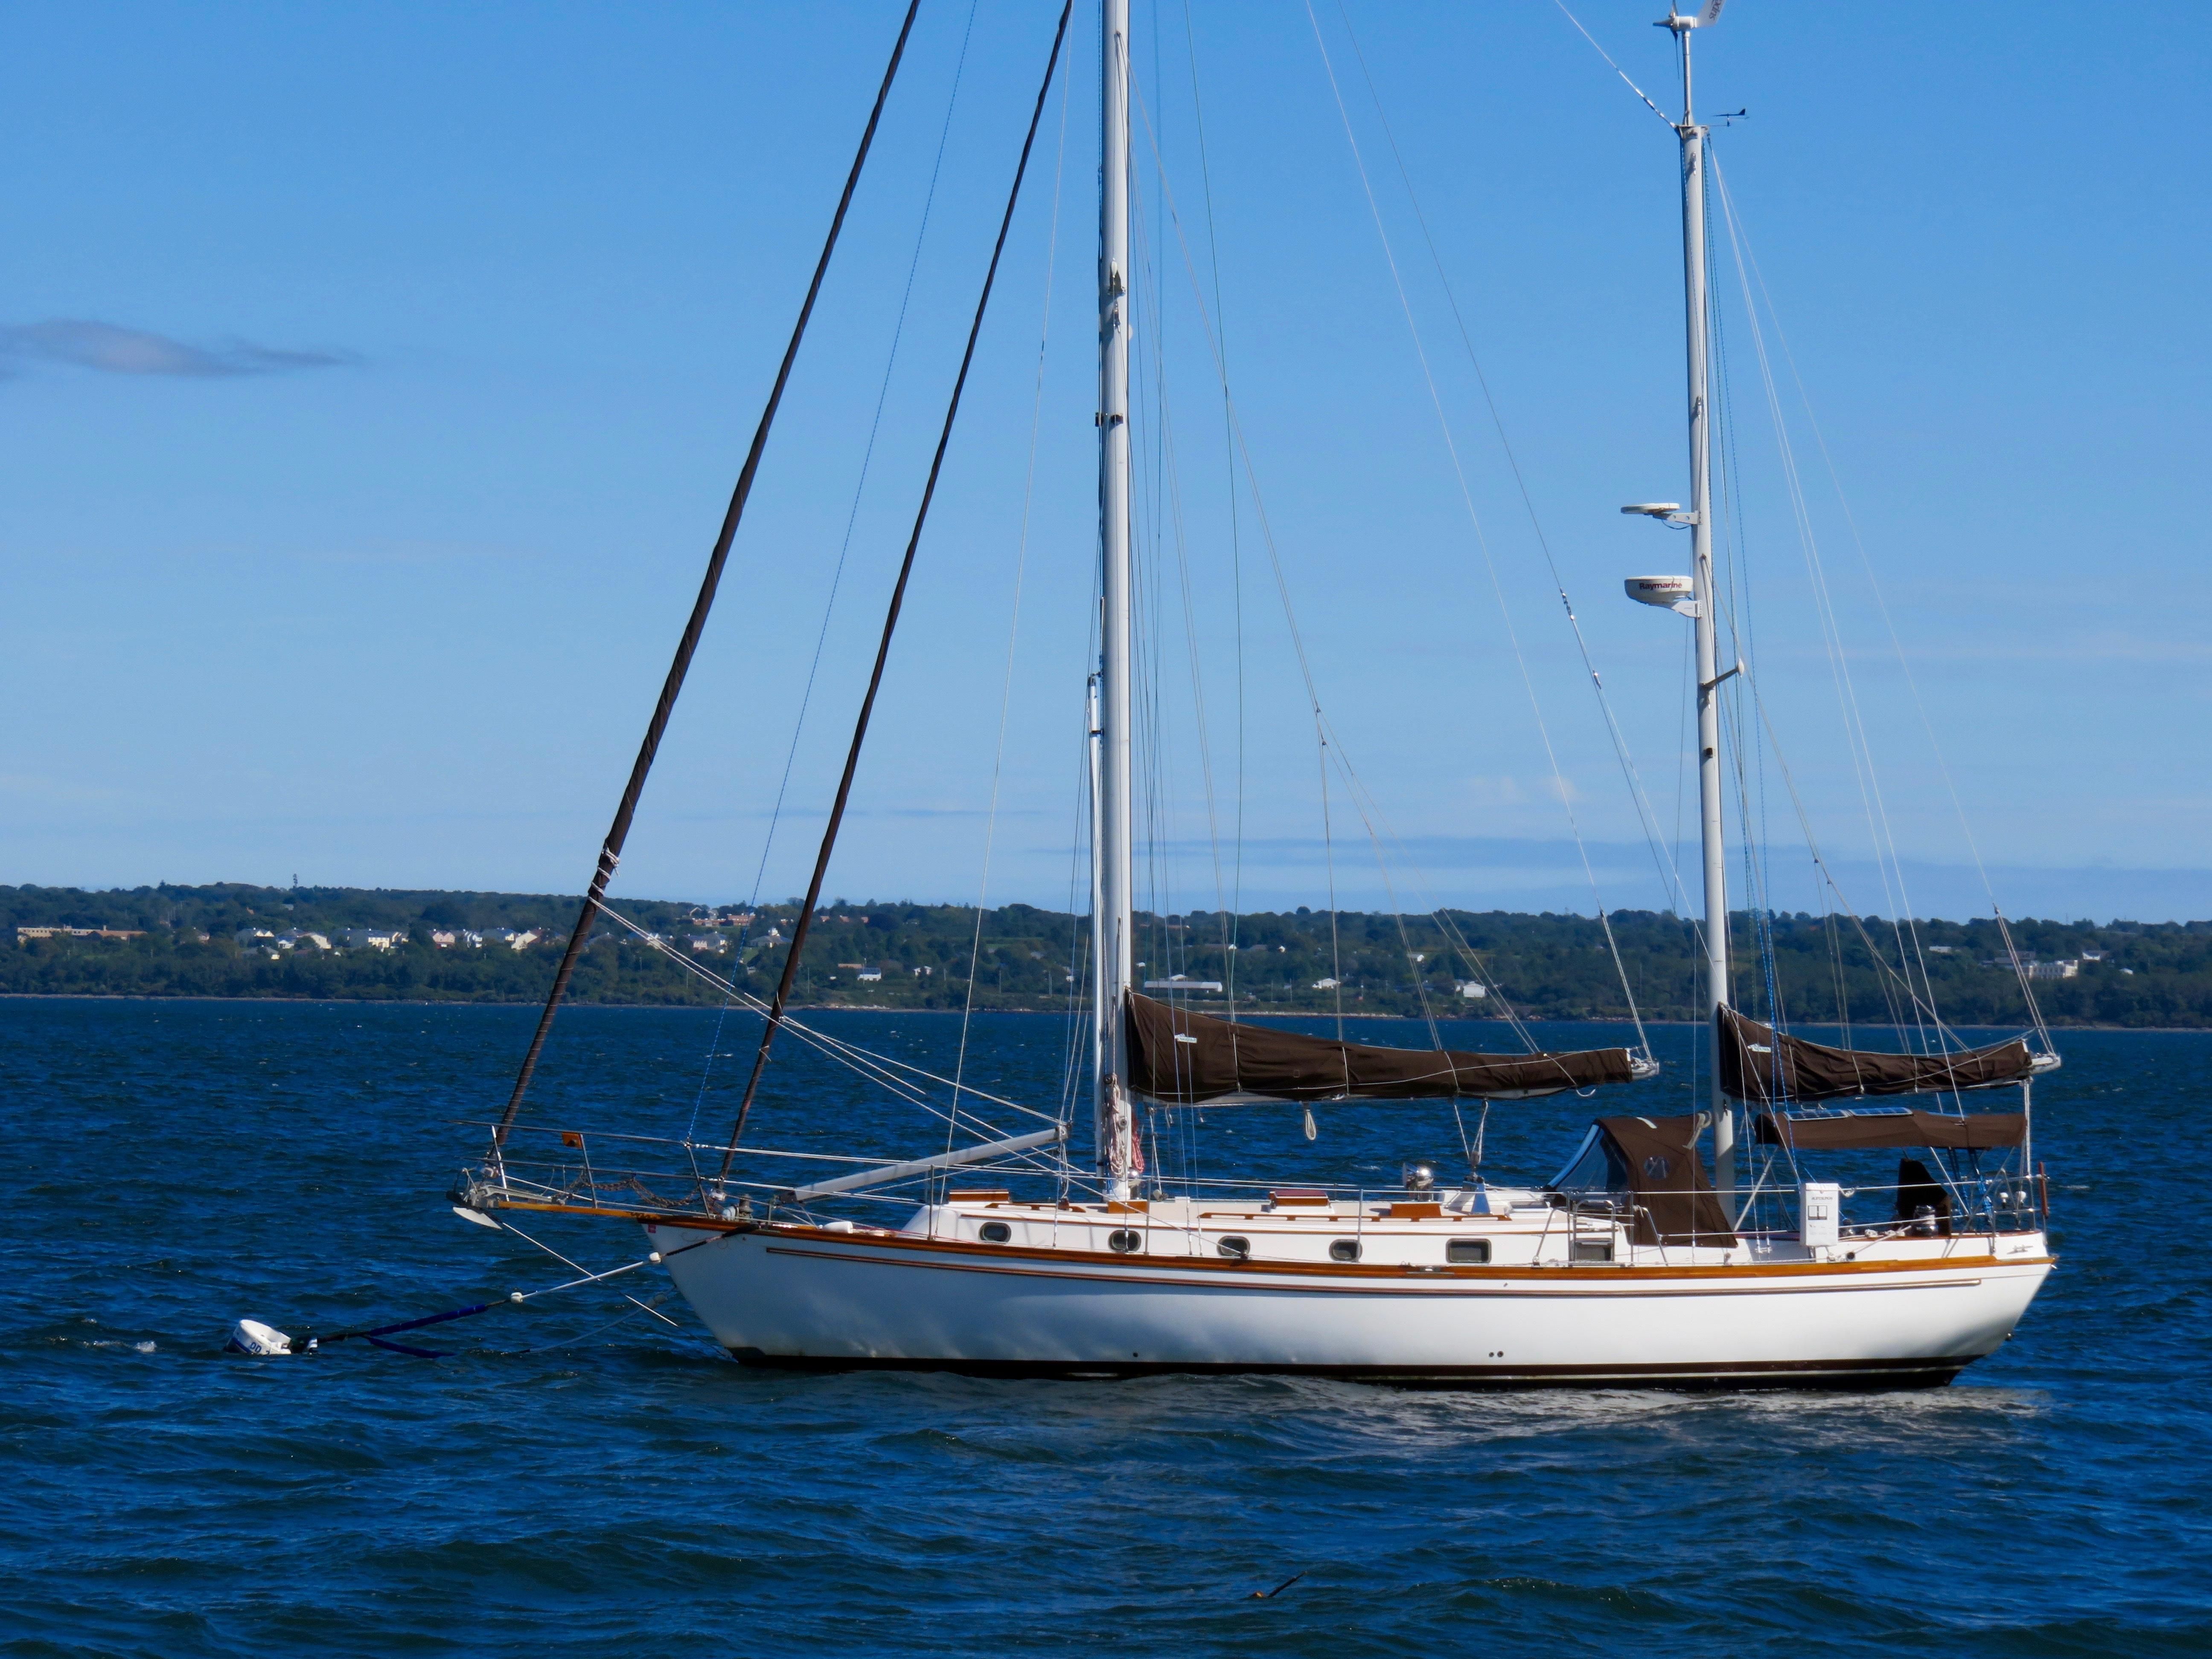 shannon sailboats for sale by owner